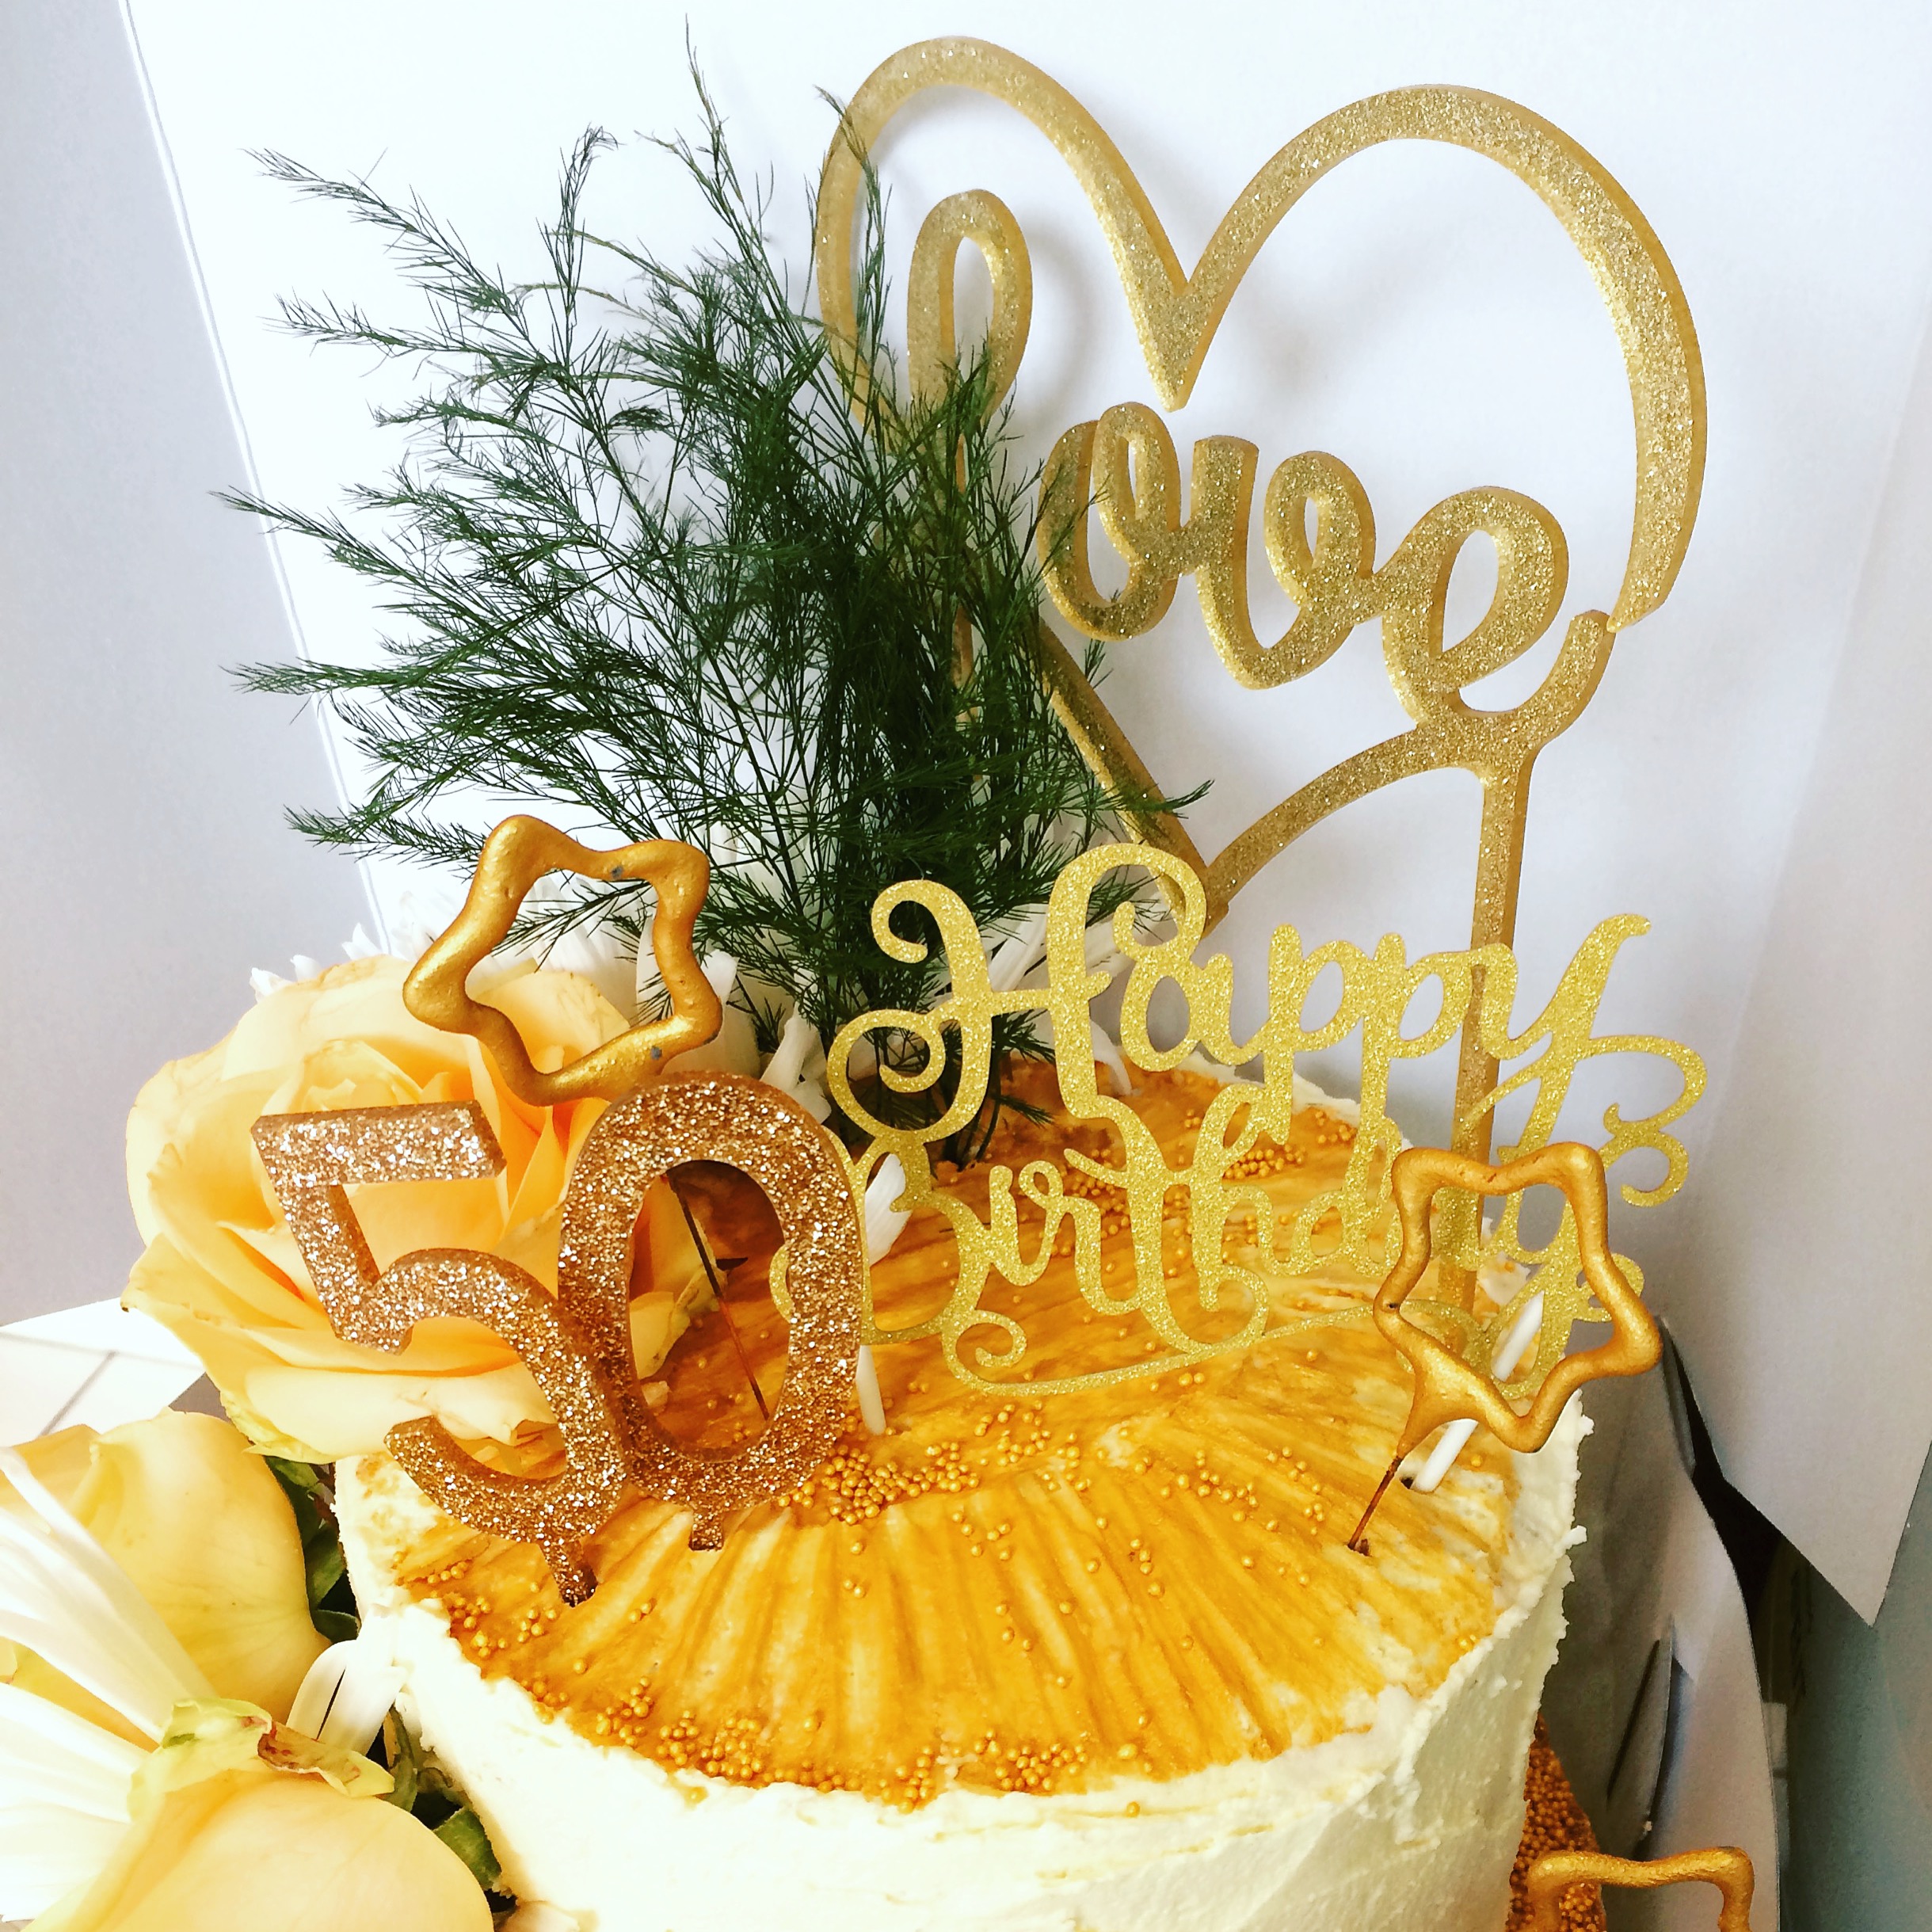 A picture of a 50th birthday cake. It is has vanilla frosting and is decorated with some greenery and words that say Love and Happy Birthday and two golden star shaped candles.